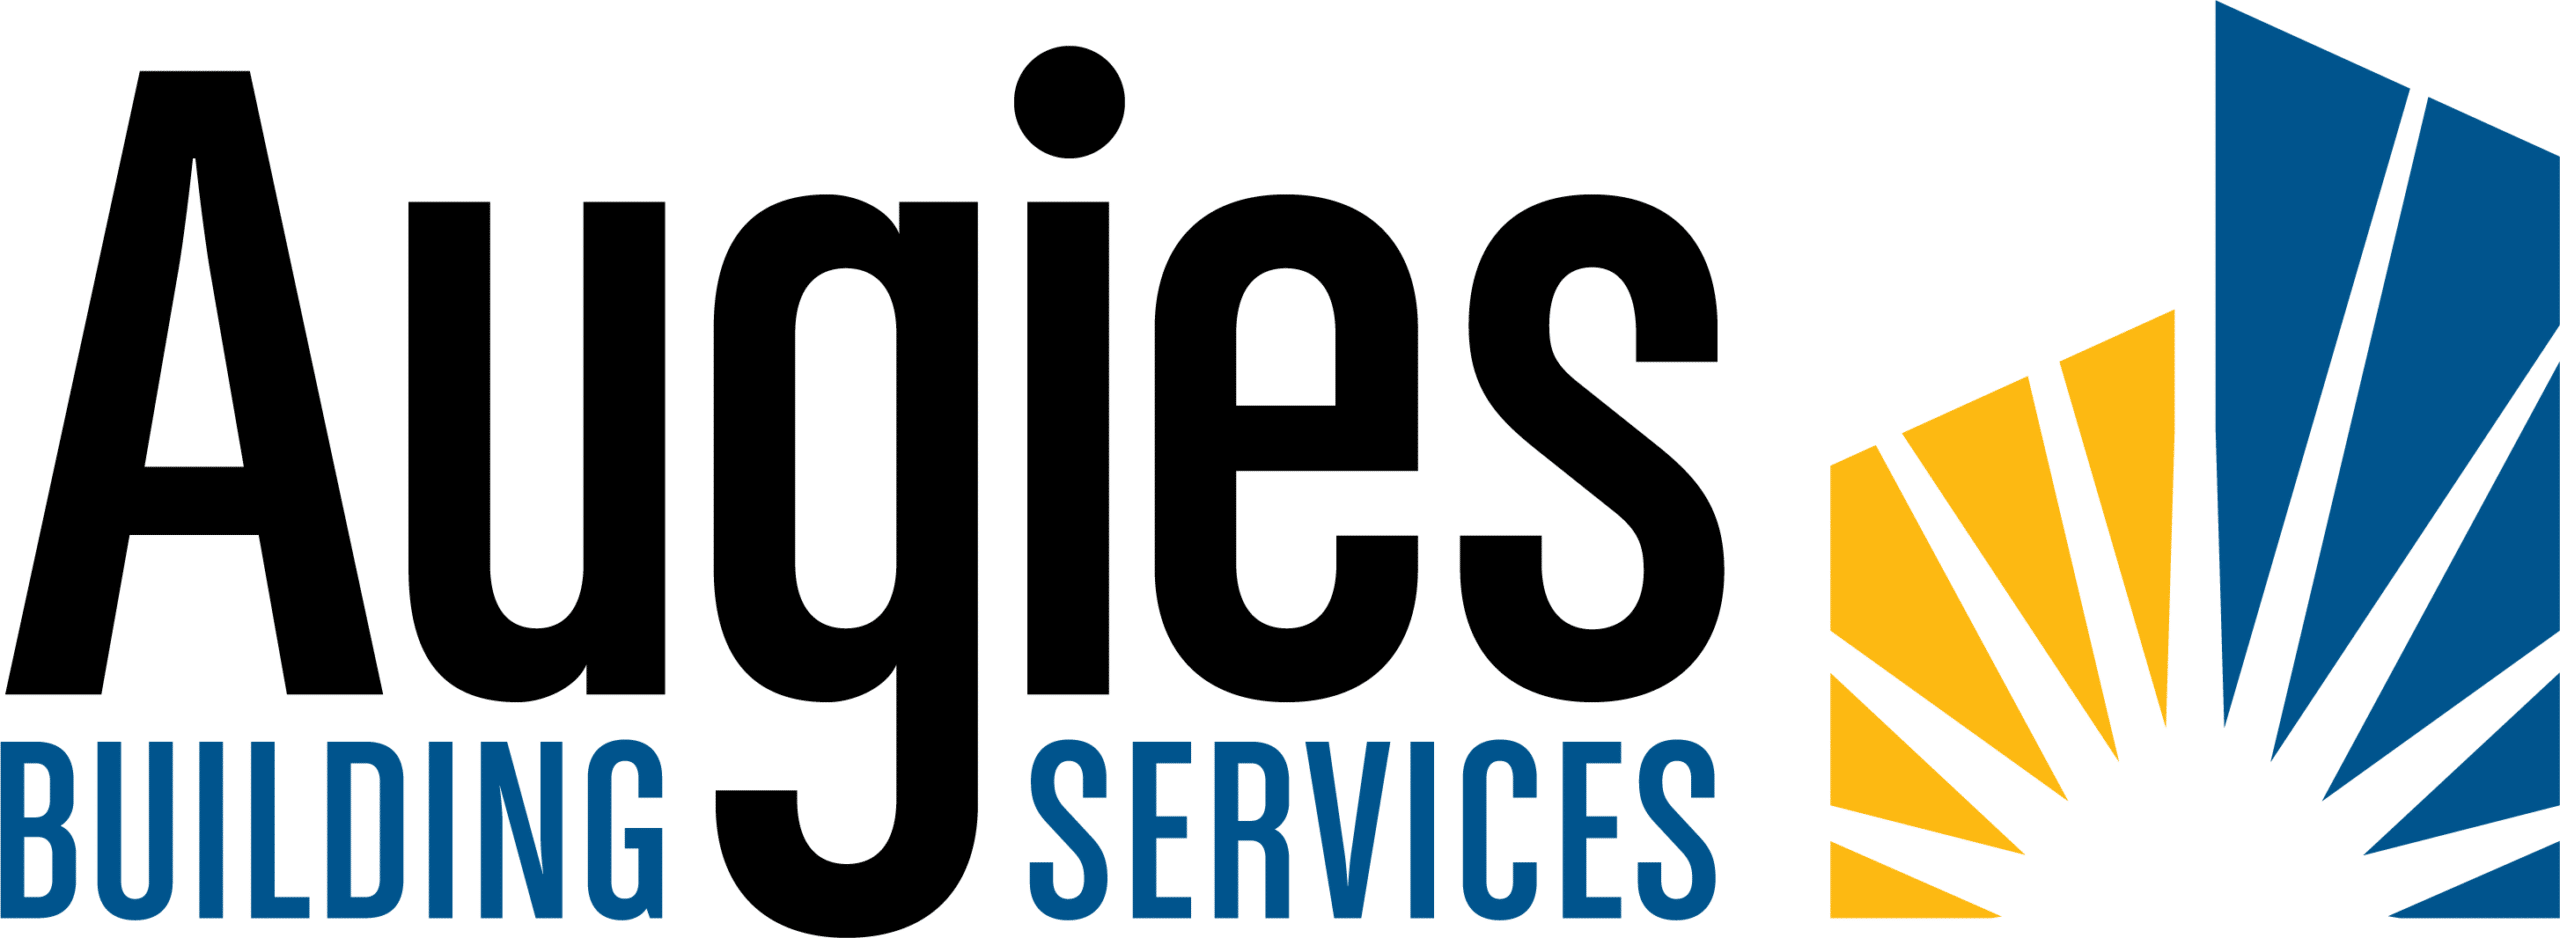 All Events – Christian Business Round Table | Augies Janitorial Services : 